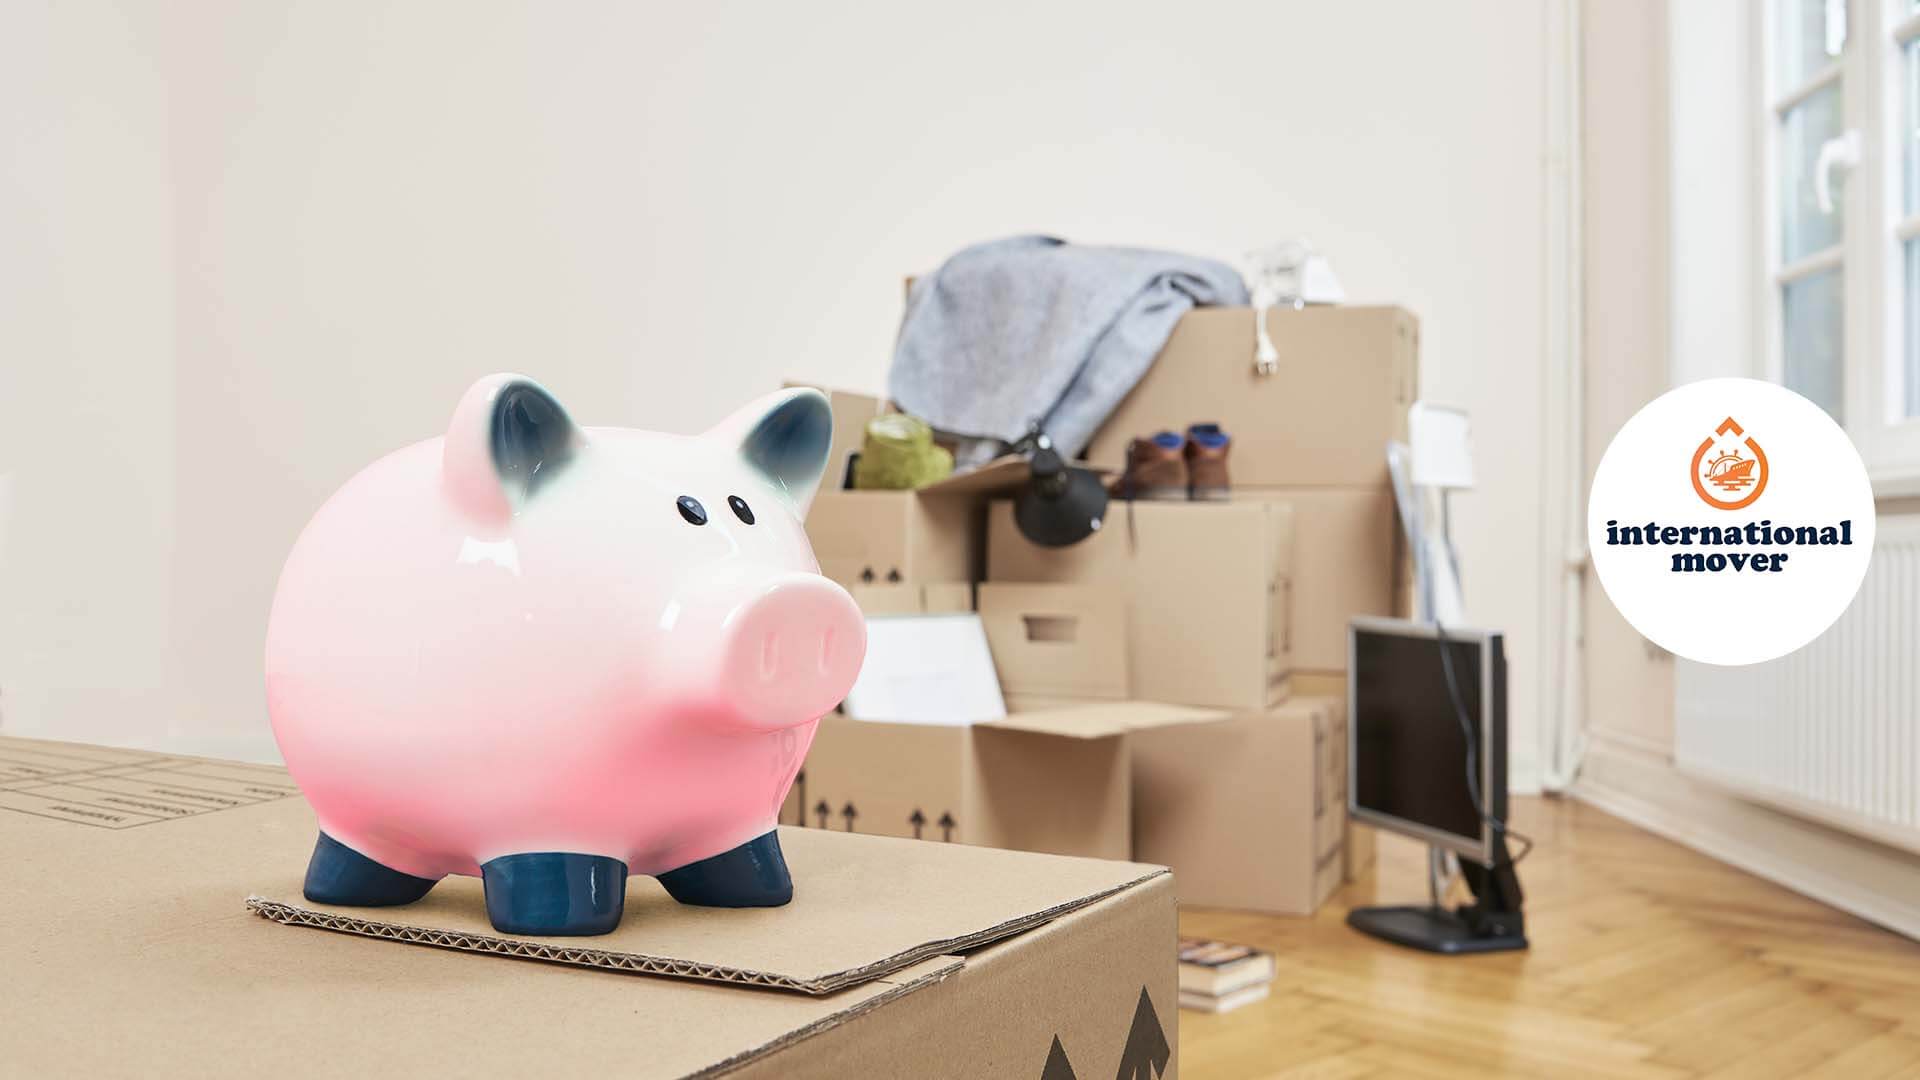 Piggy bank and prepared boxes for moving internationally